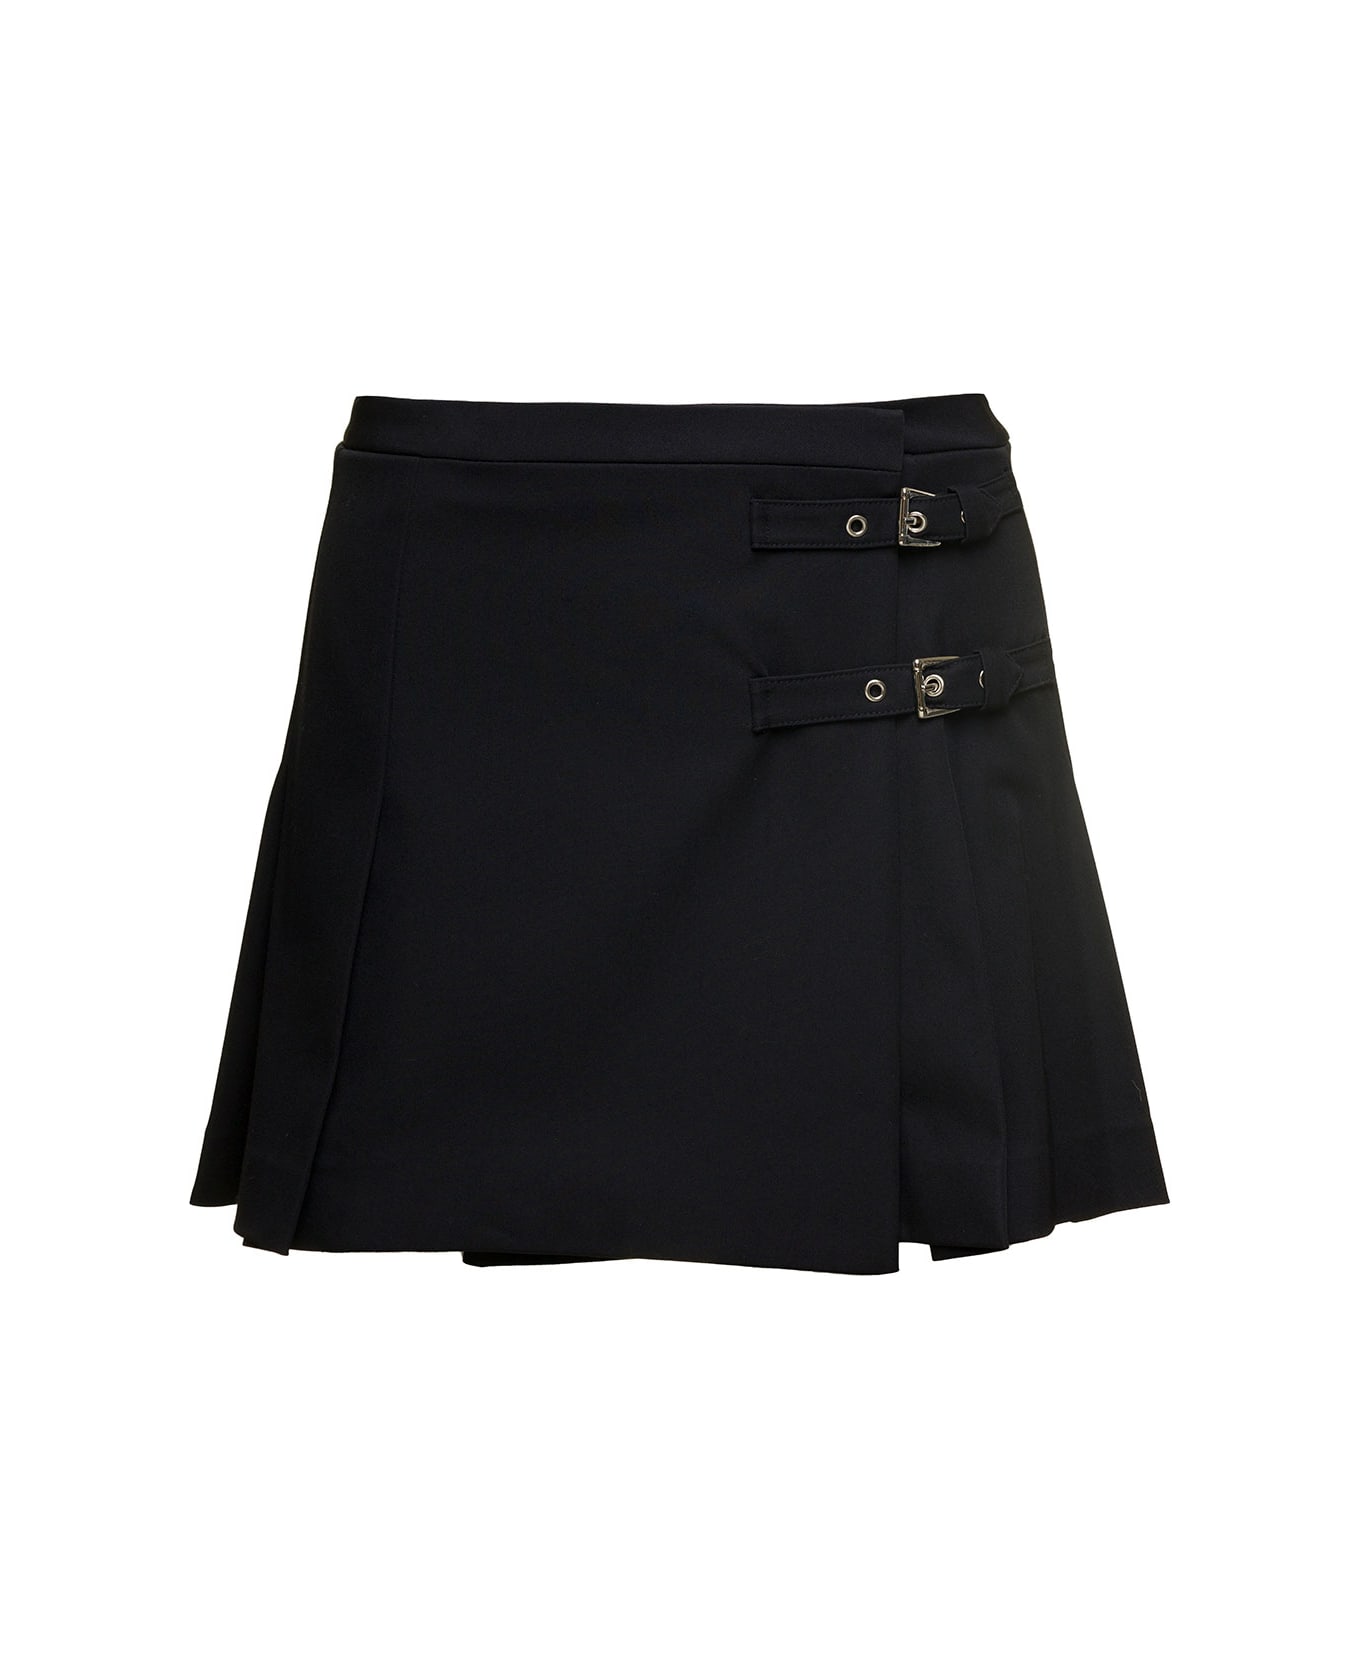 Alessandra Rich Black Mini Skirt With Side Bukle Detail With Loop In Wool Blend Woman - Black